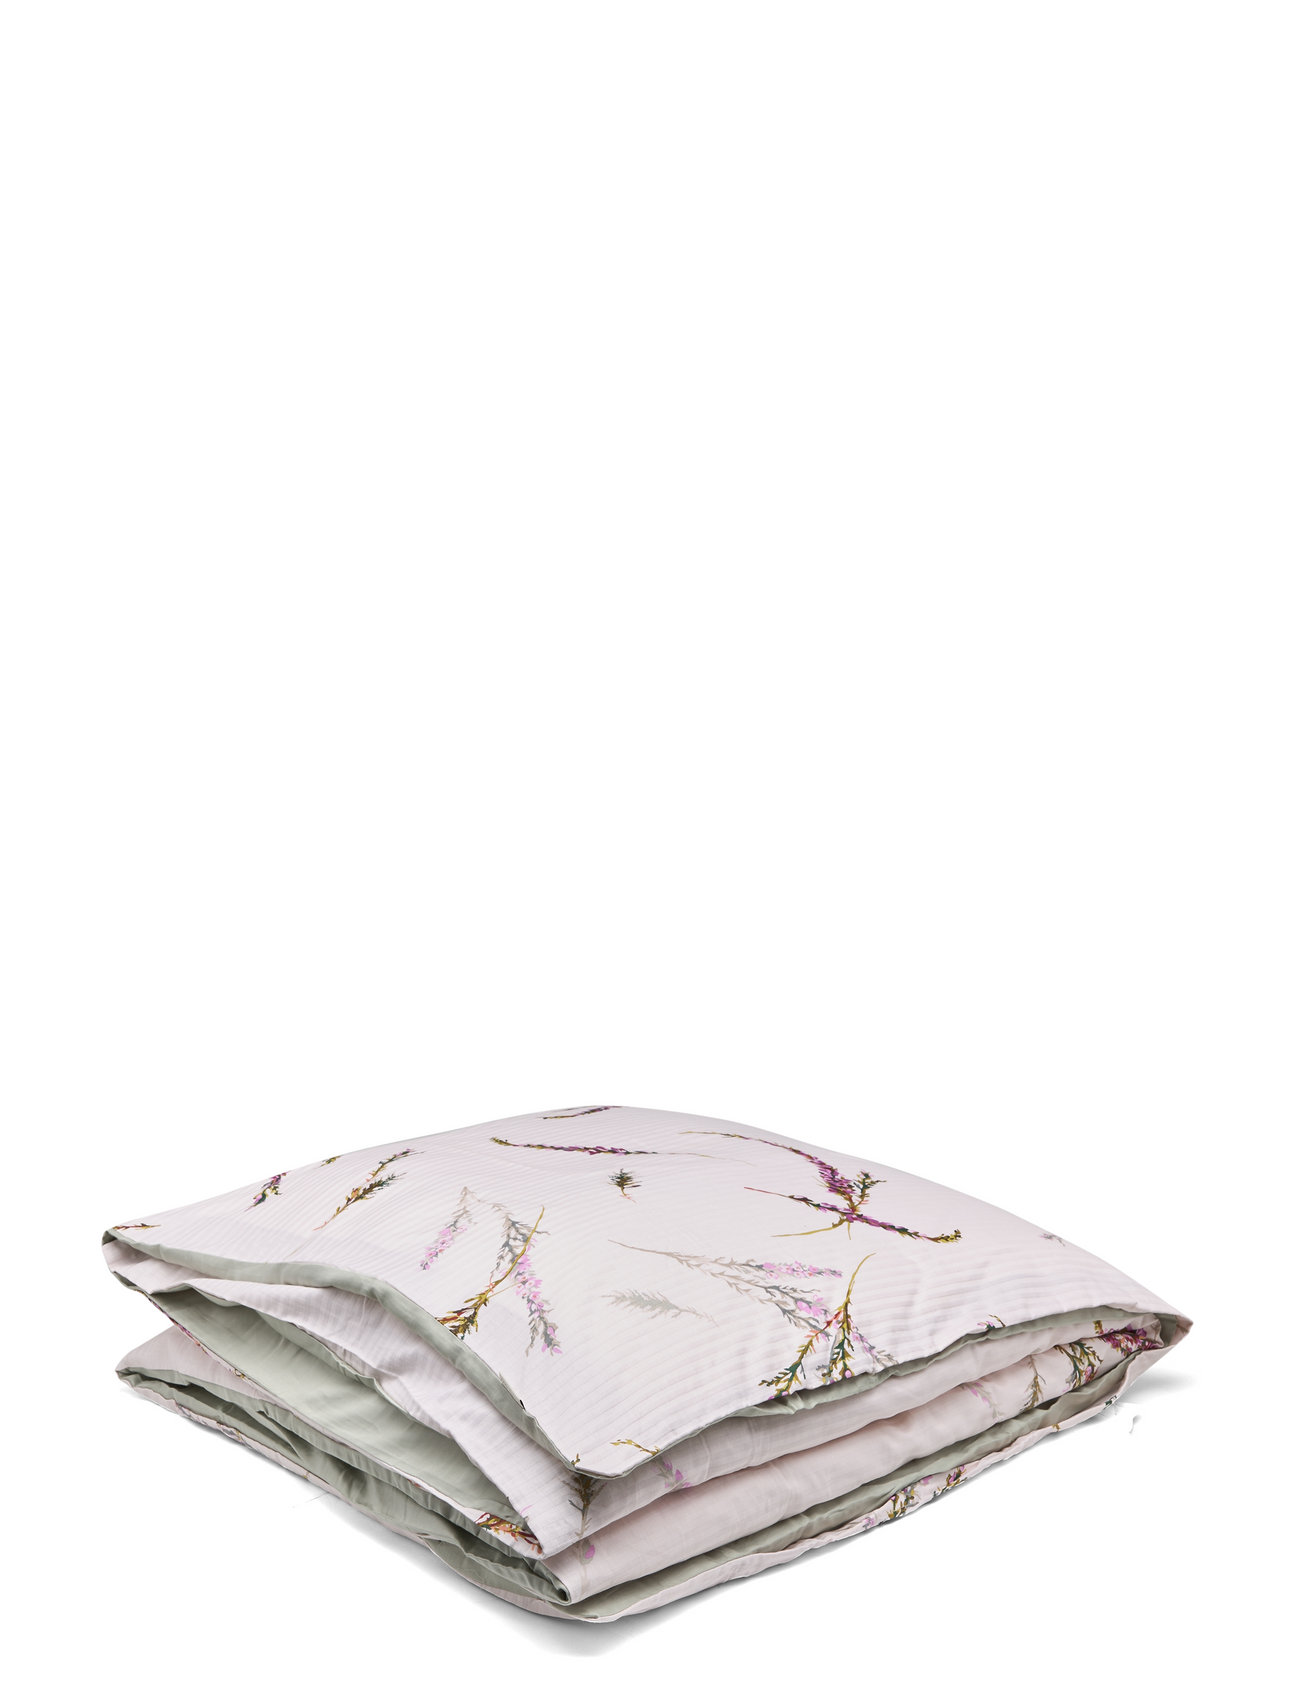 Double Duvet Cover Heather Home Textiles Bedtextiles Duvet Covers Pink Ted Baker